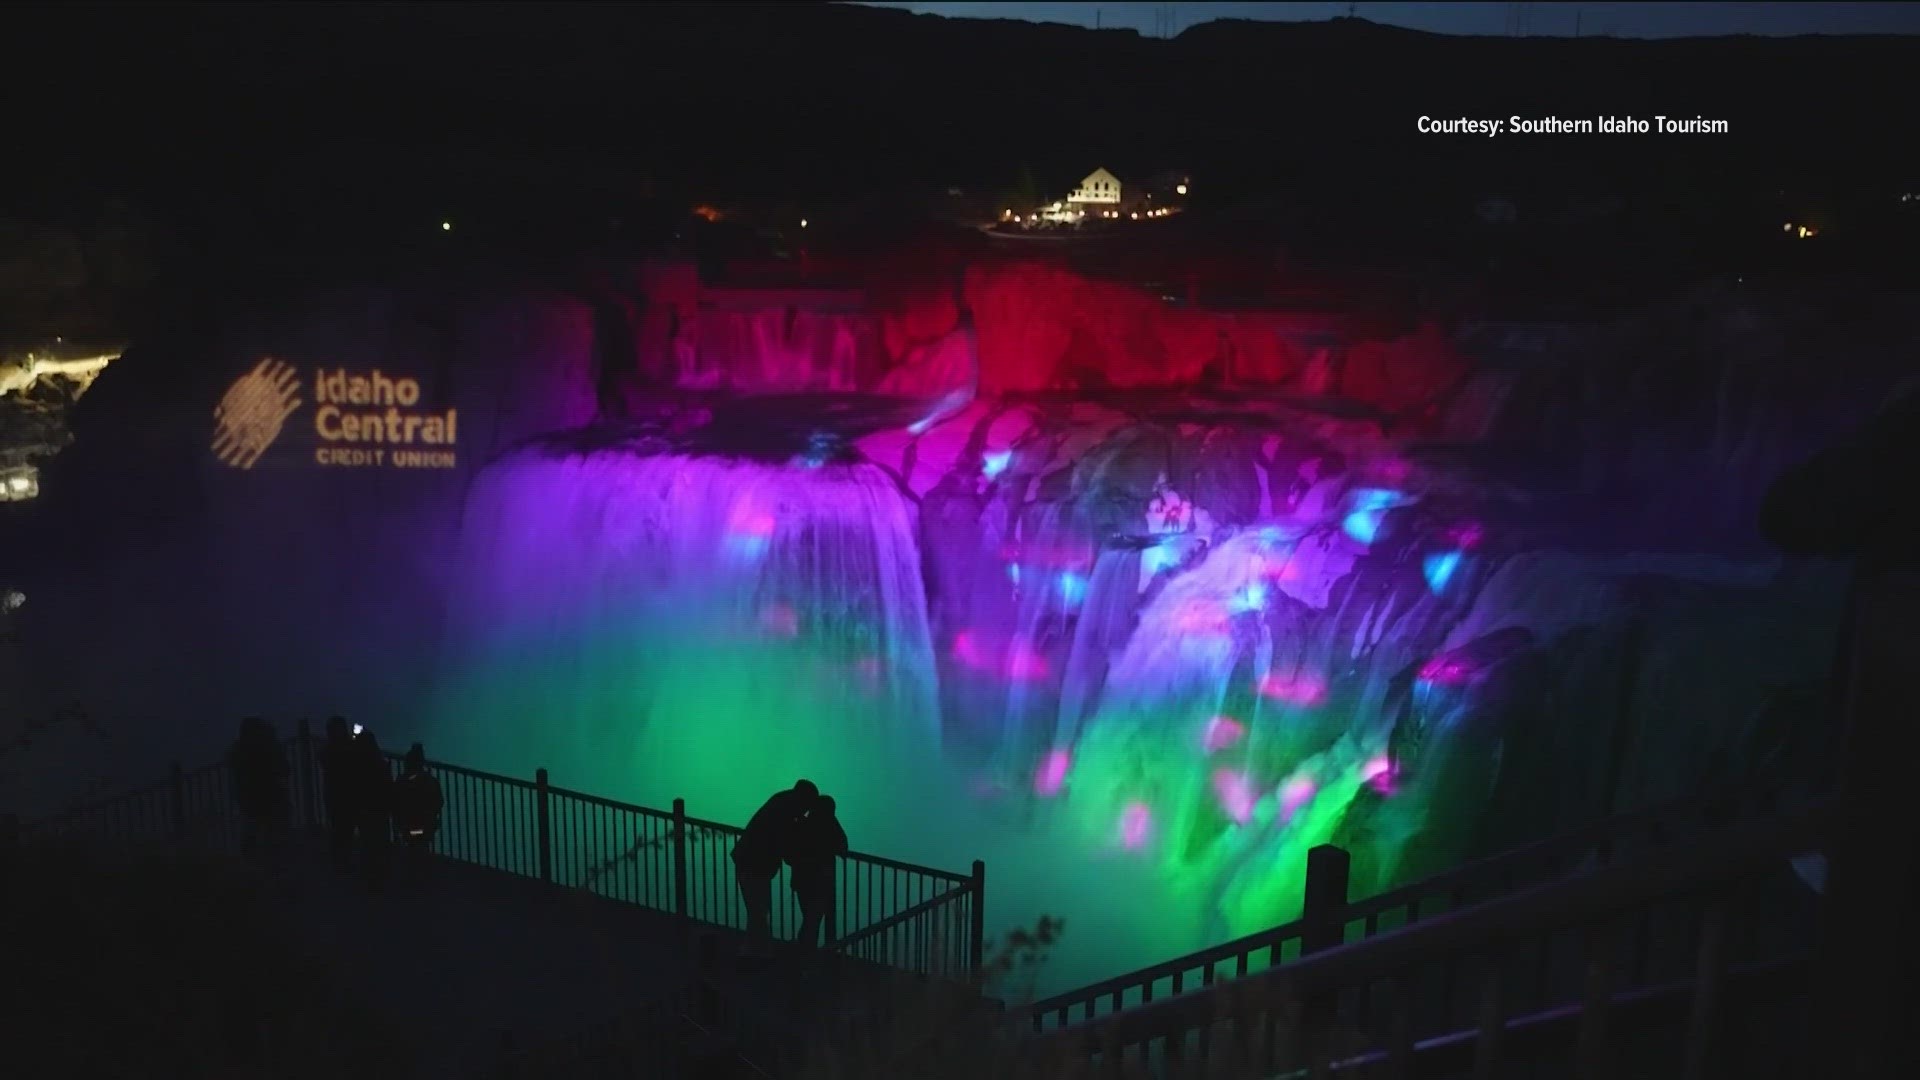 Shoshone Falls will be illuminated in stunning colored lights for the fourth consecutive year. However, this year, the event will last twice as long...sort of.